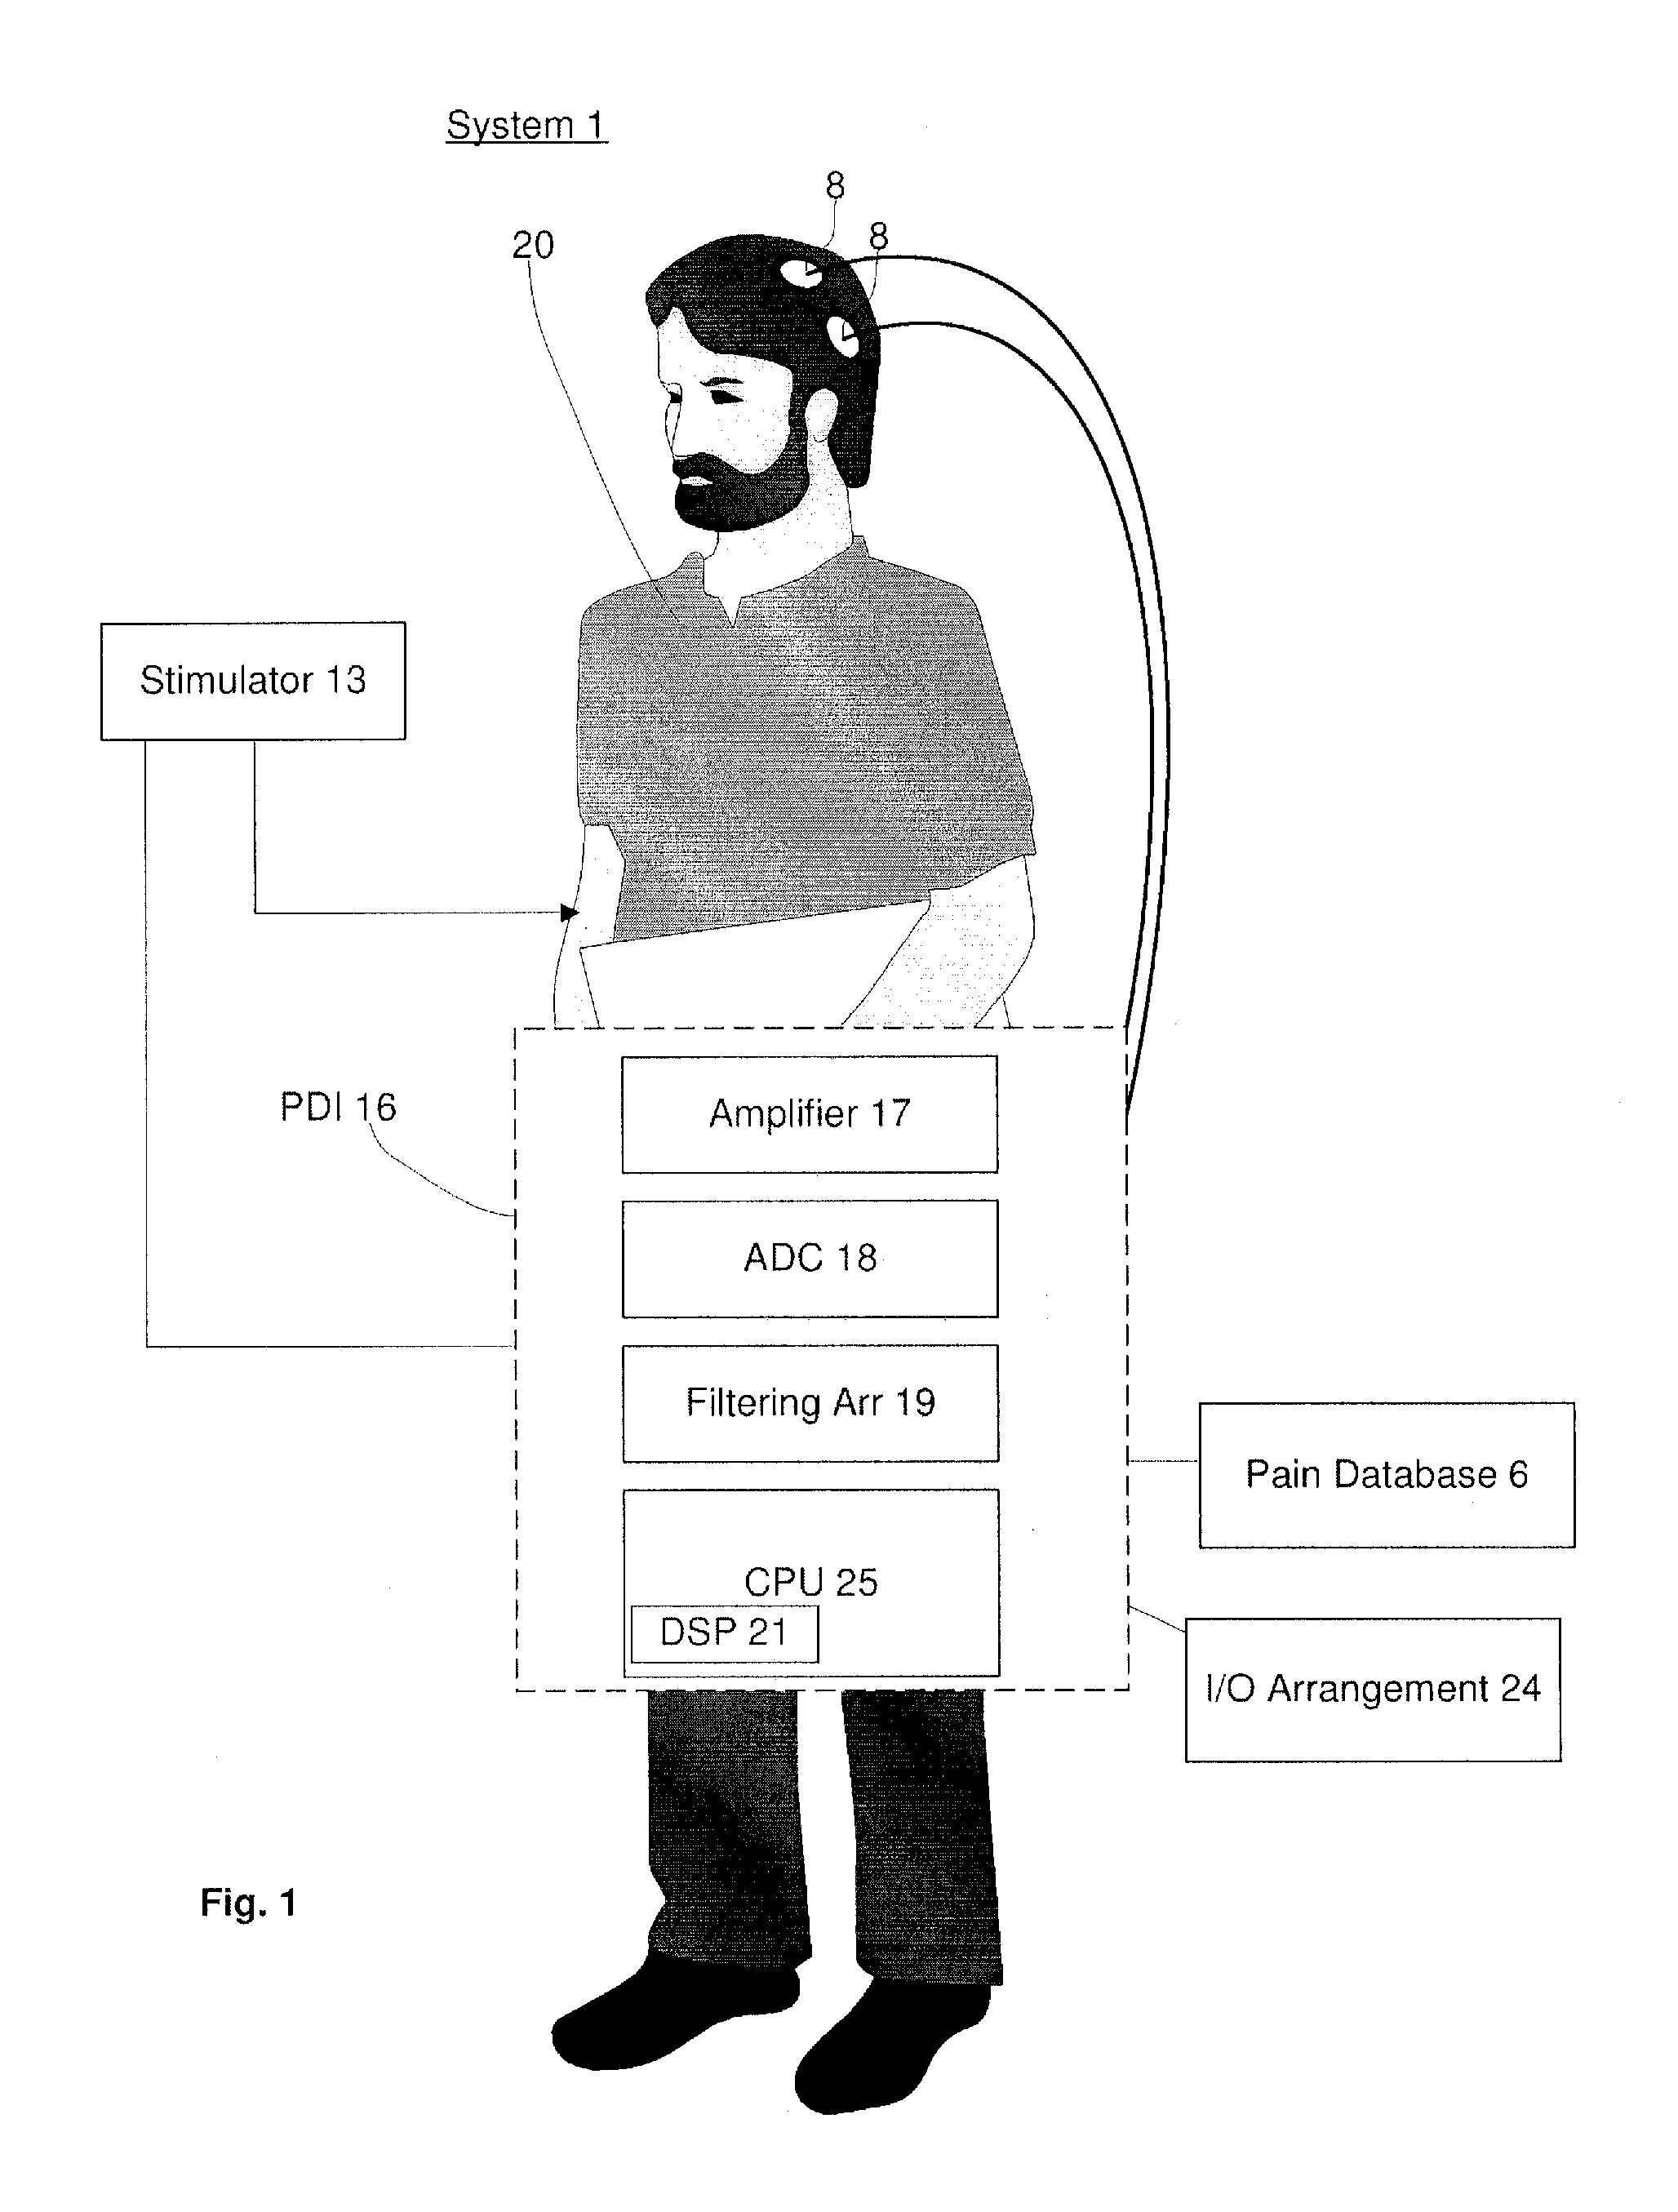 System and method for pain detection and computation of a pain quantification index